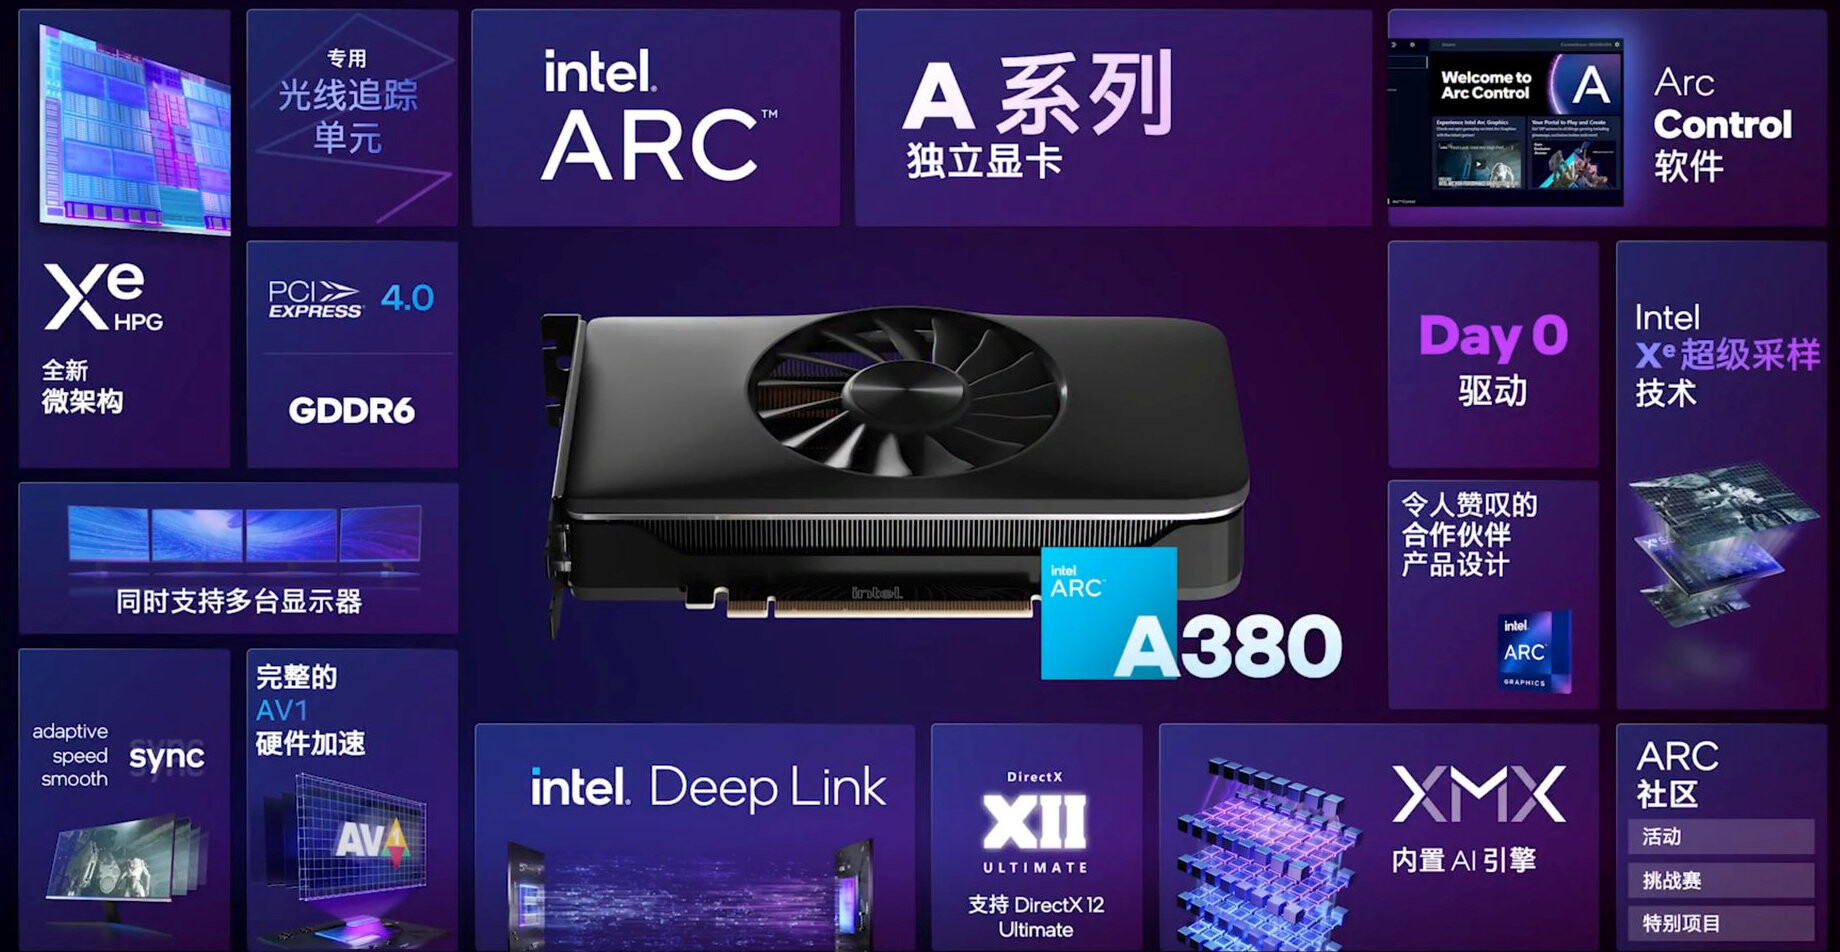 Media asset in full size related to 3dfxzone.it news item entitled as follows: Intel lancia la video card per desktop Arc A380 per gaming a 1080p con 60fps | Image Name: news33381_Intel-Arc-A380_2.jpg